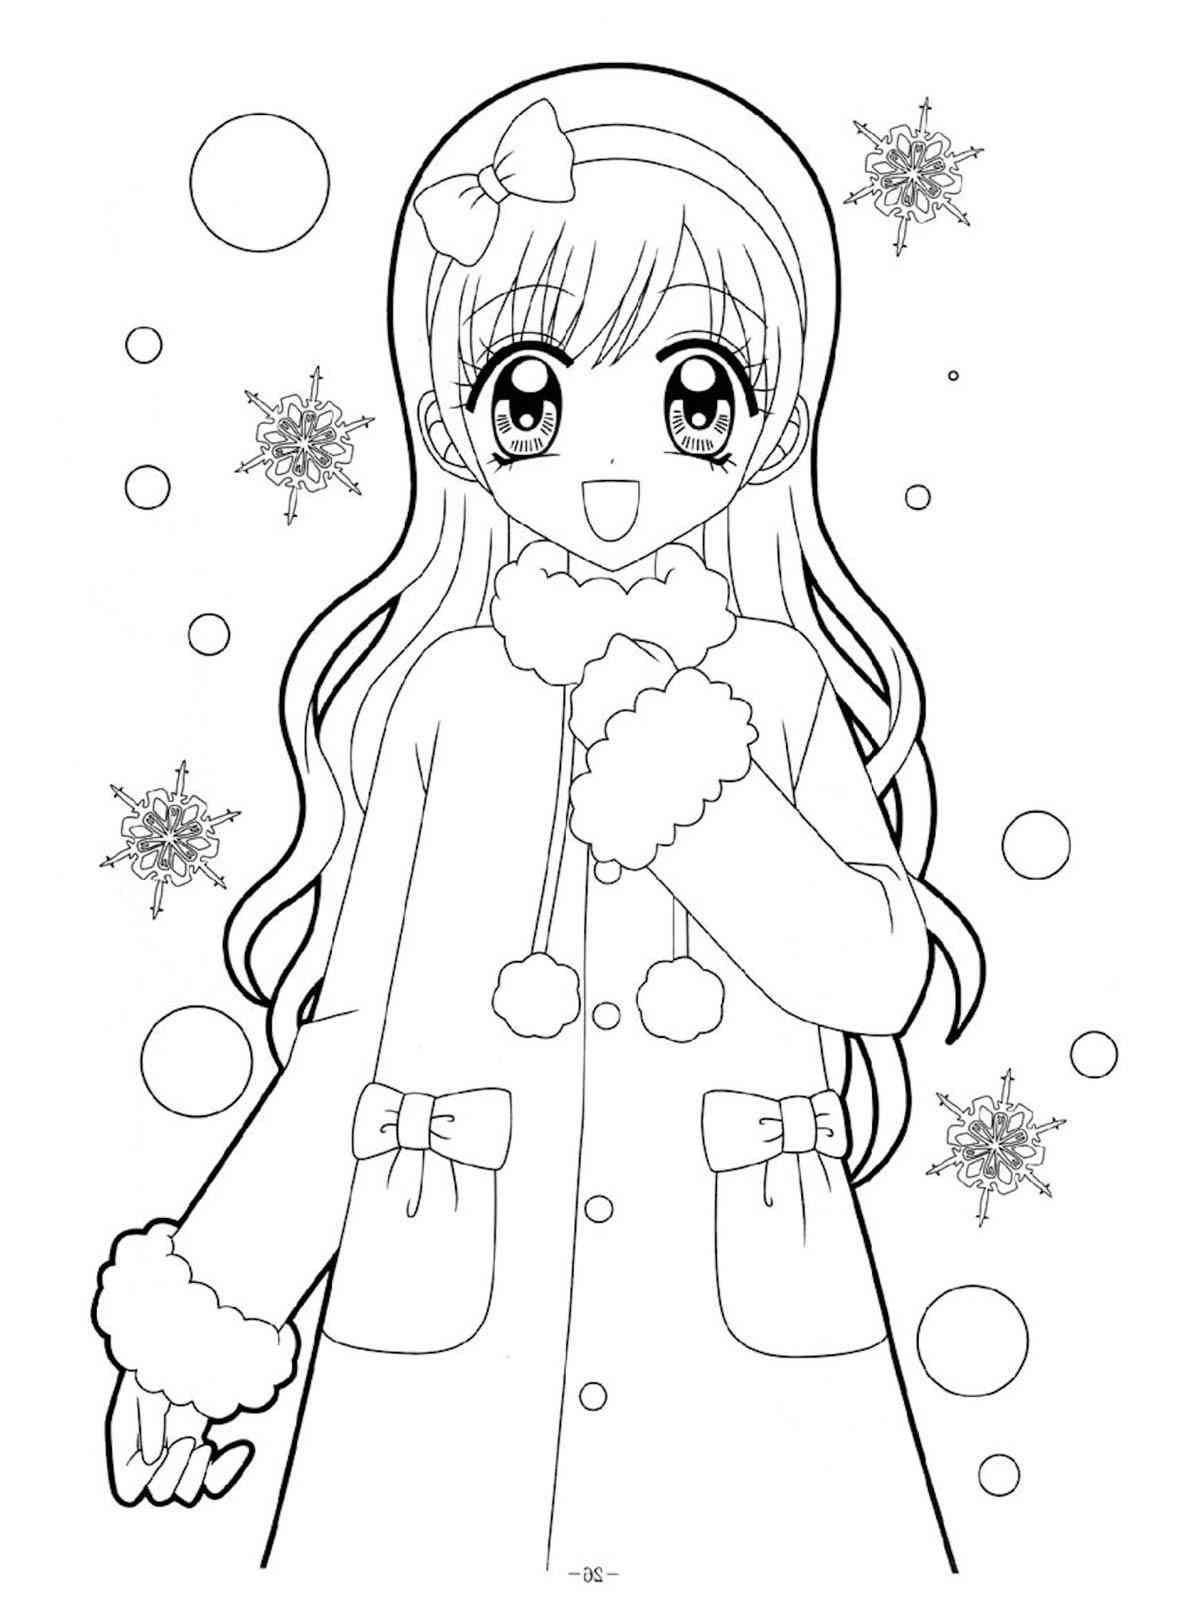 Anime Girl 45 coloring page